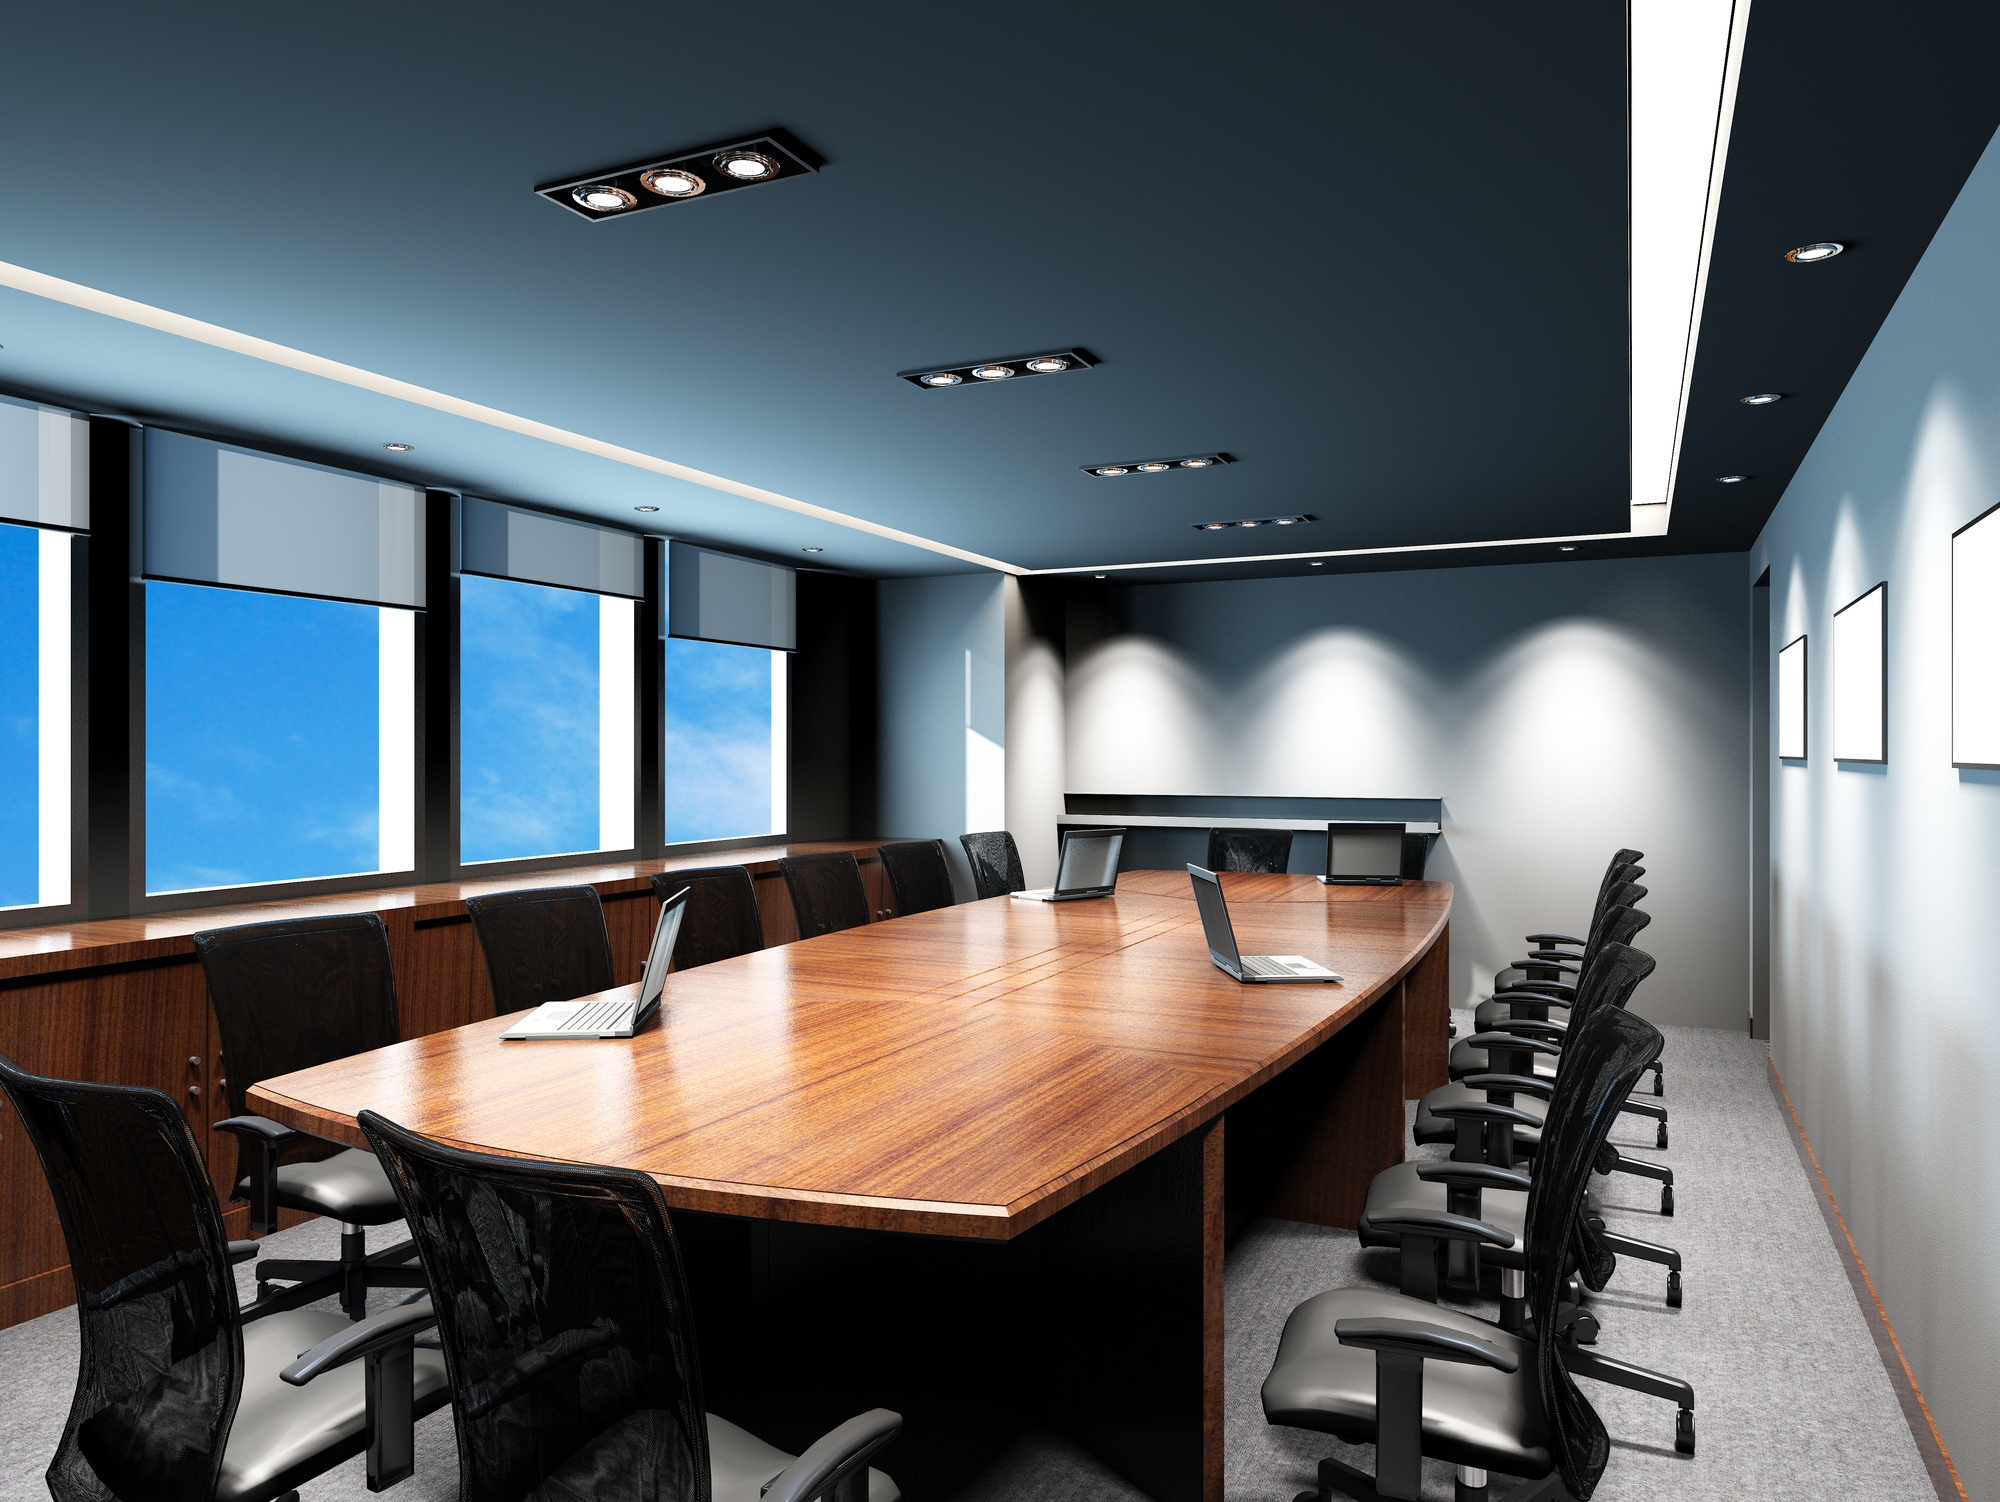 Business meeting room in office with modern decoration